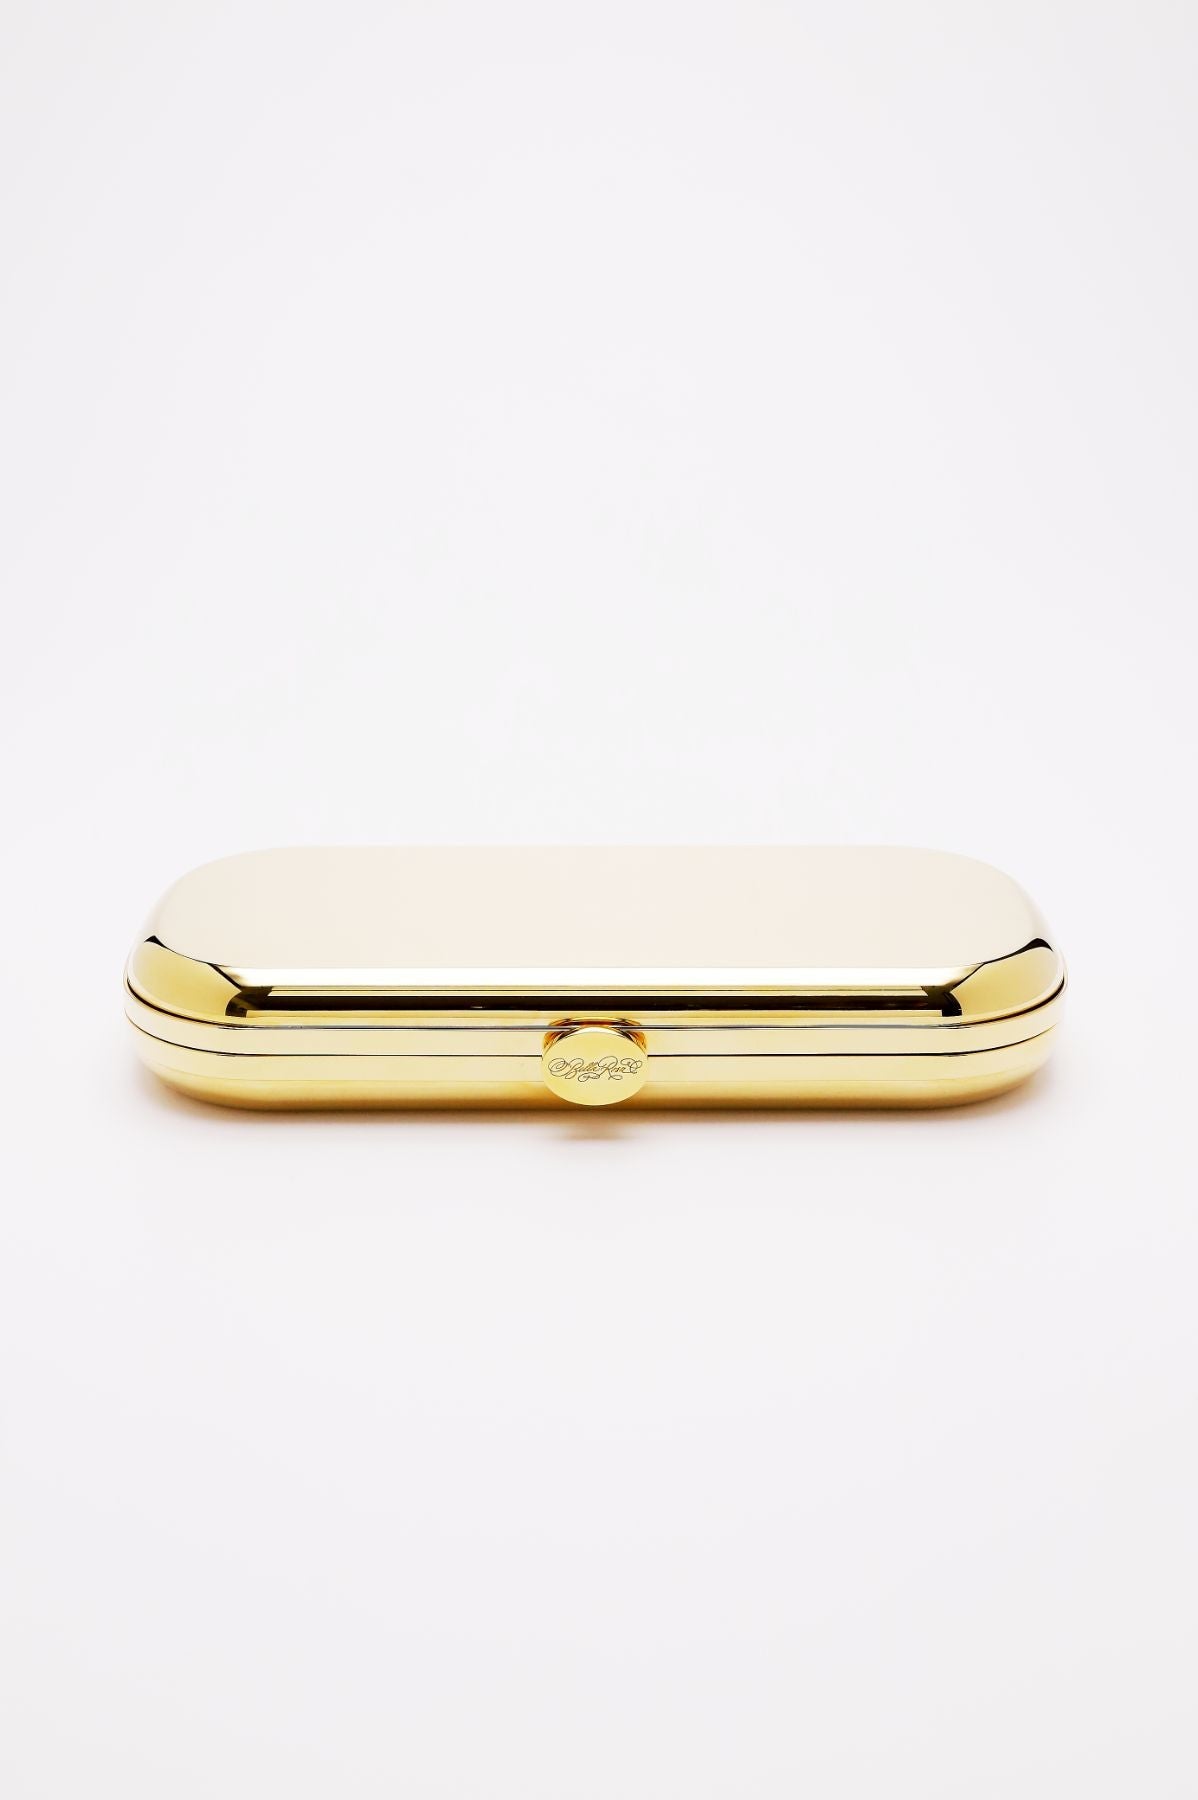 Gold-toned &quot;The Bella Rosa Collection&#39;s Bella Clutch Golden Grande&quot; against a white background.